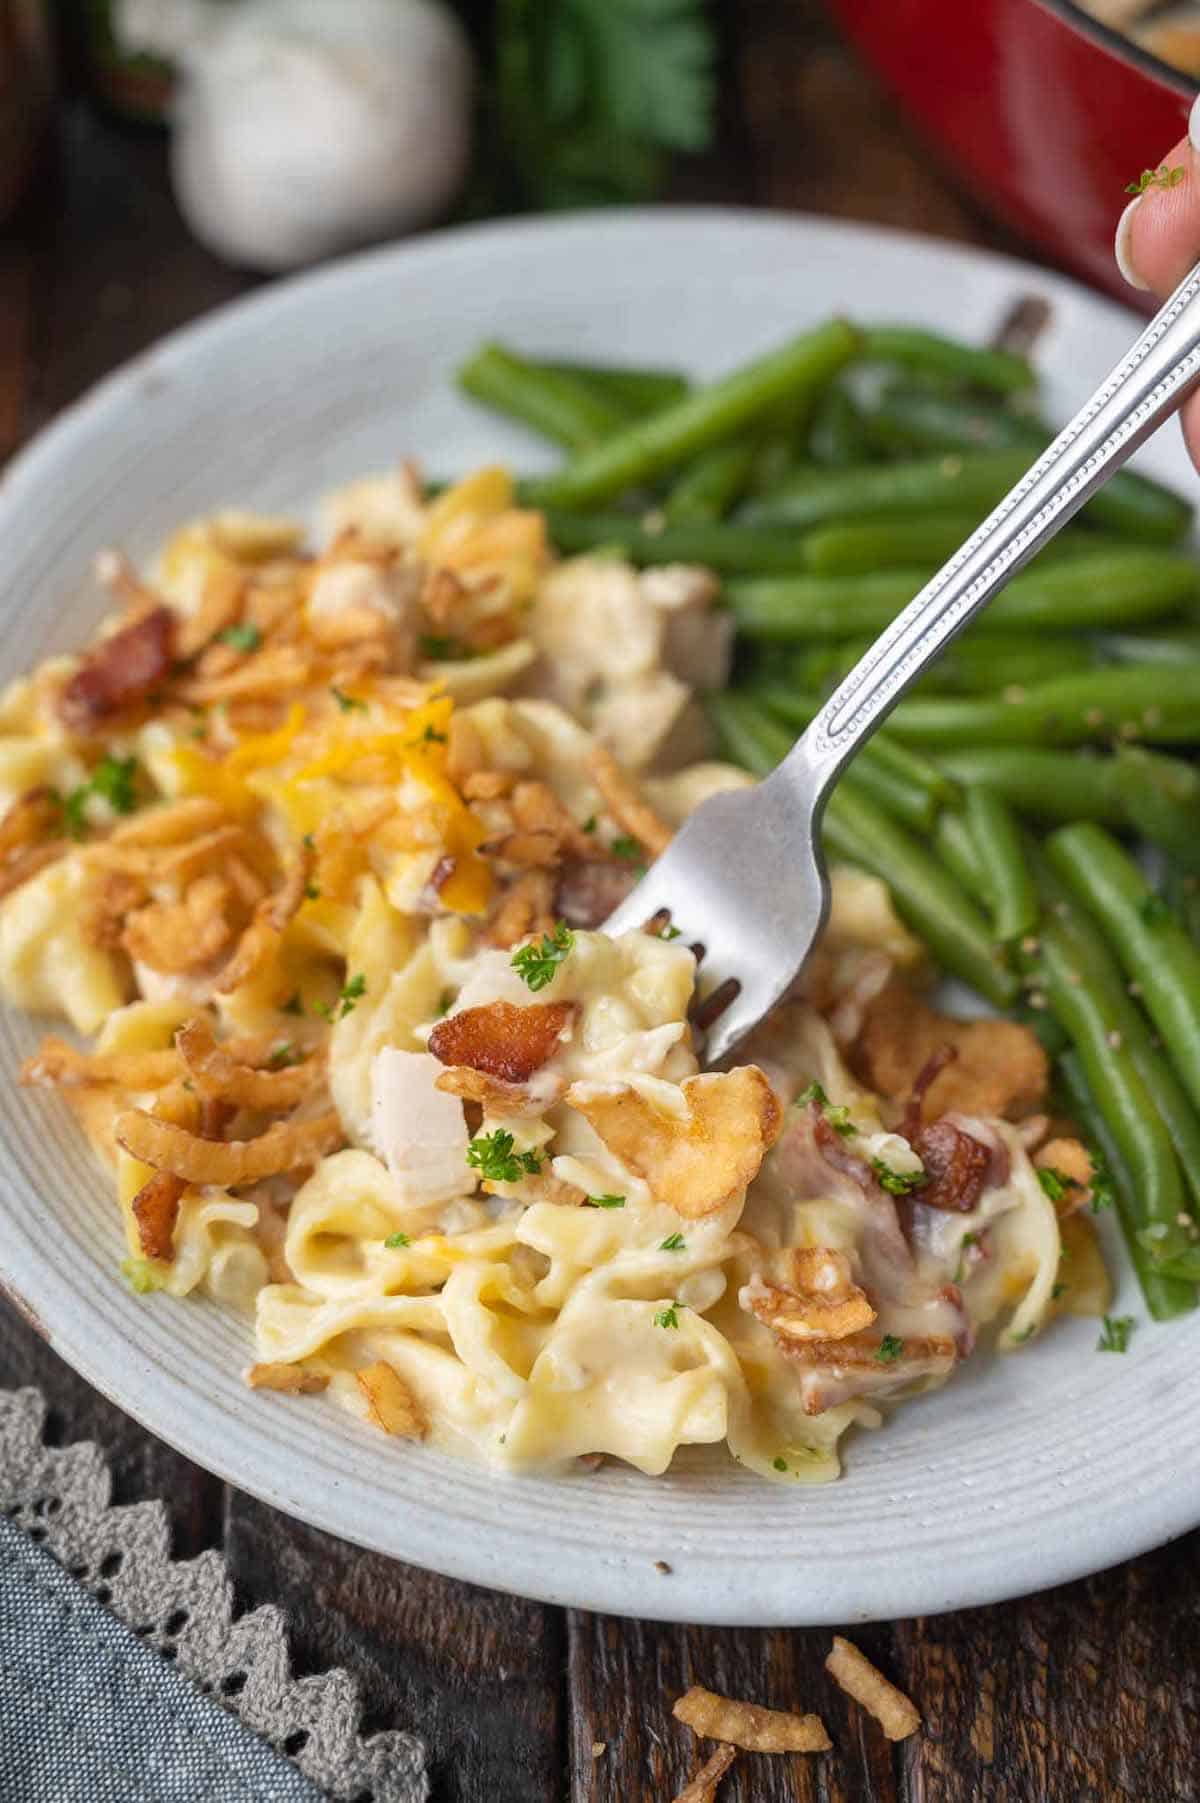 Chicken casserole on a plate with green beans.